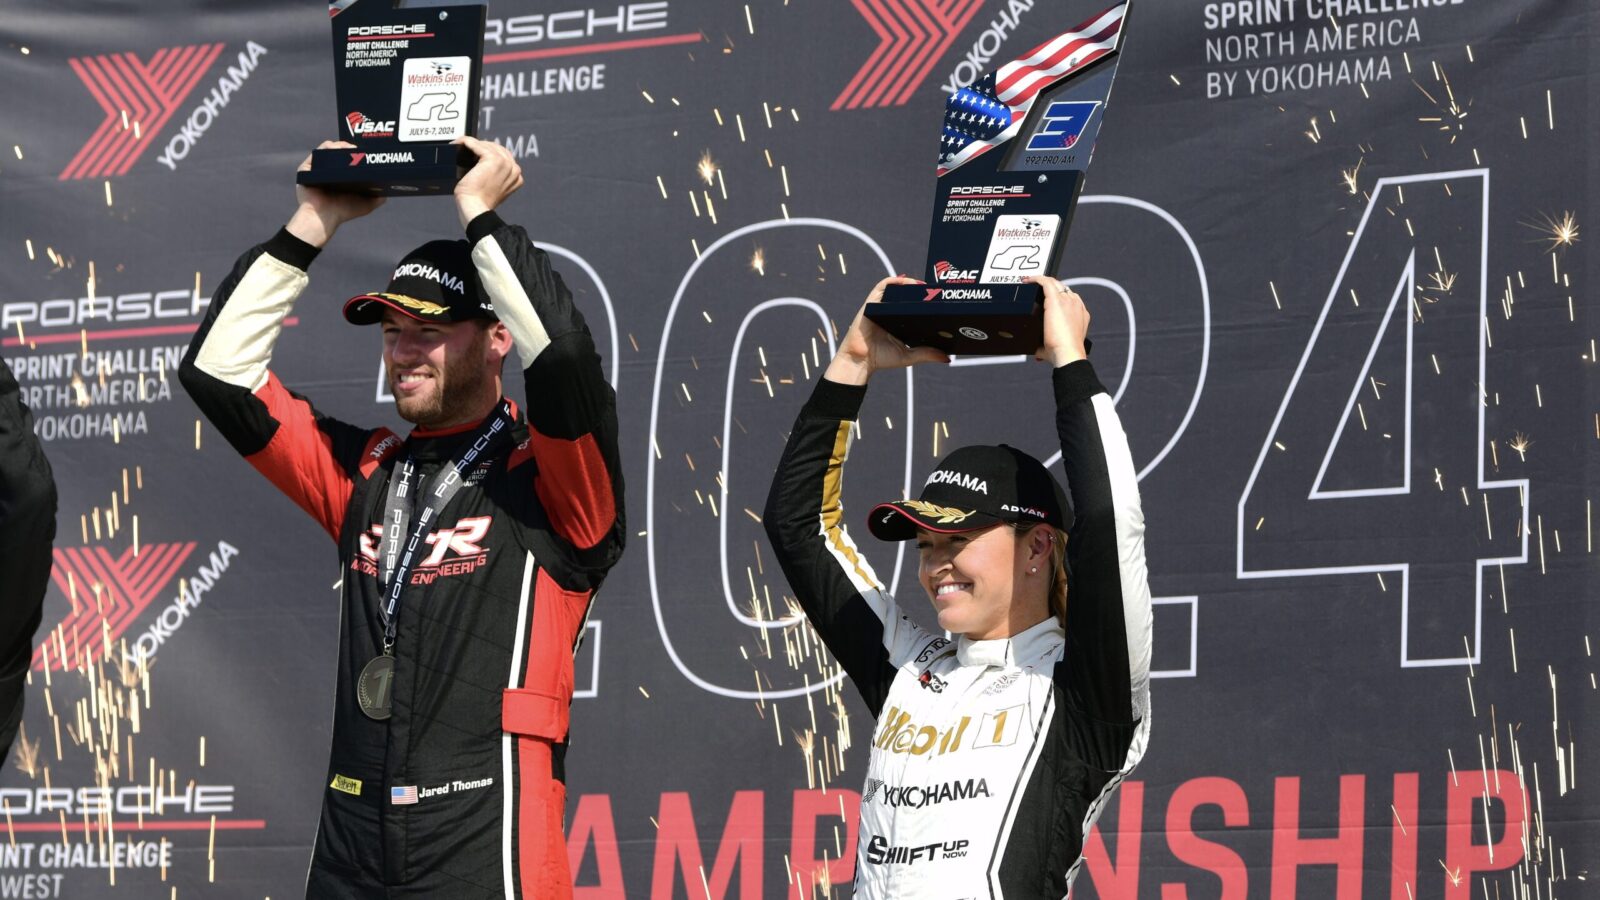 Podium and Pole Position for Freiberg at Watkins Glen